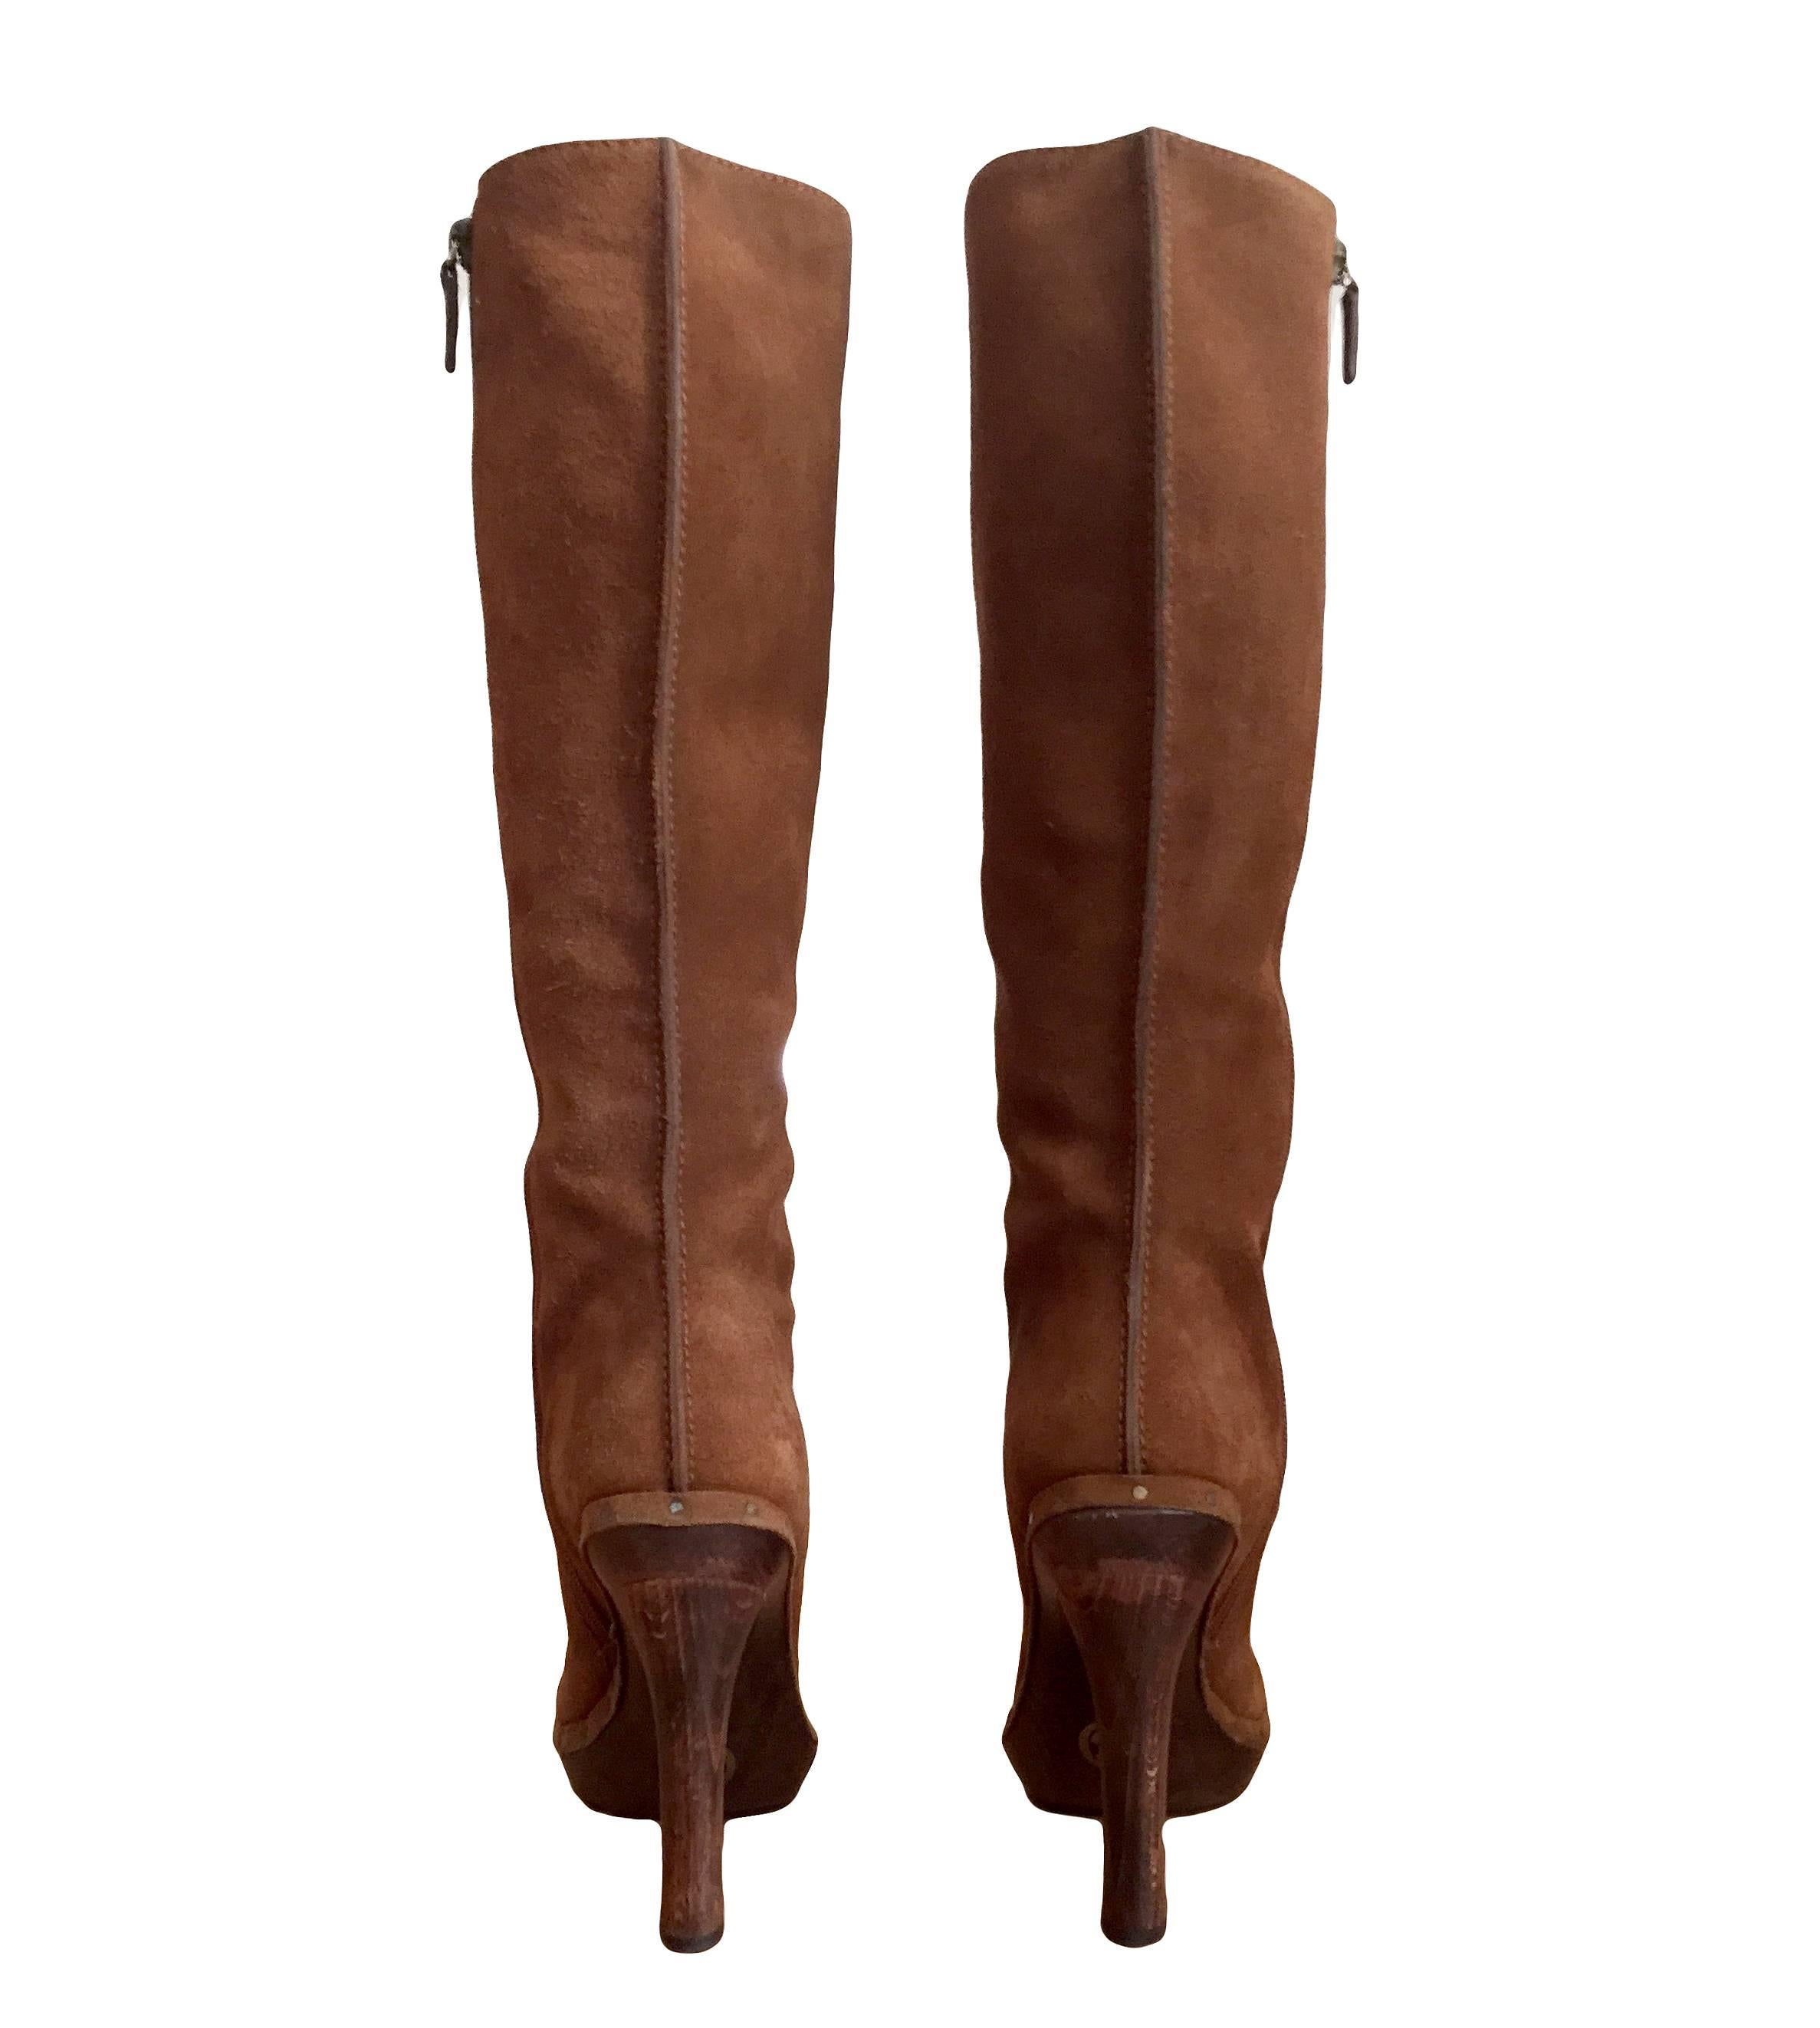 Women's Iconic Tom Ford for Gucci Brown Suede Boots Wood Soles, Late 1990s For Sale